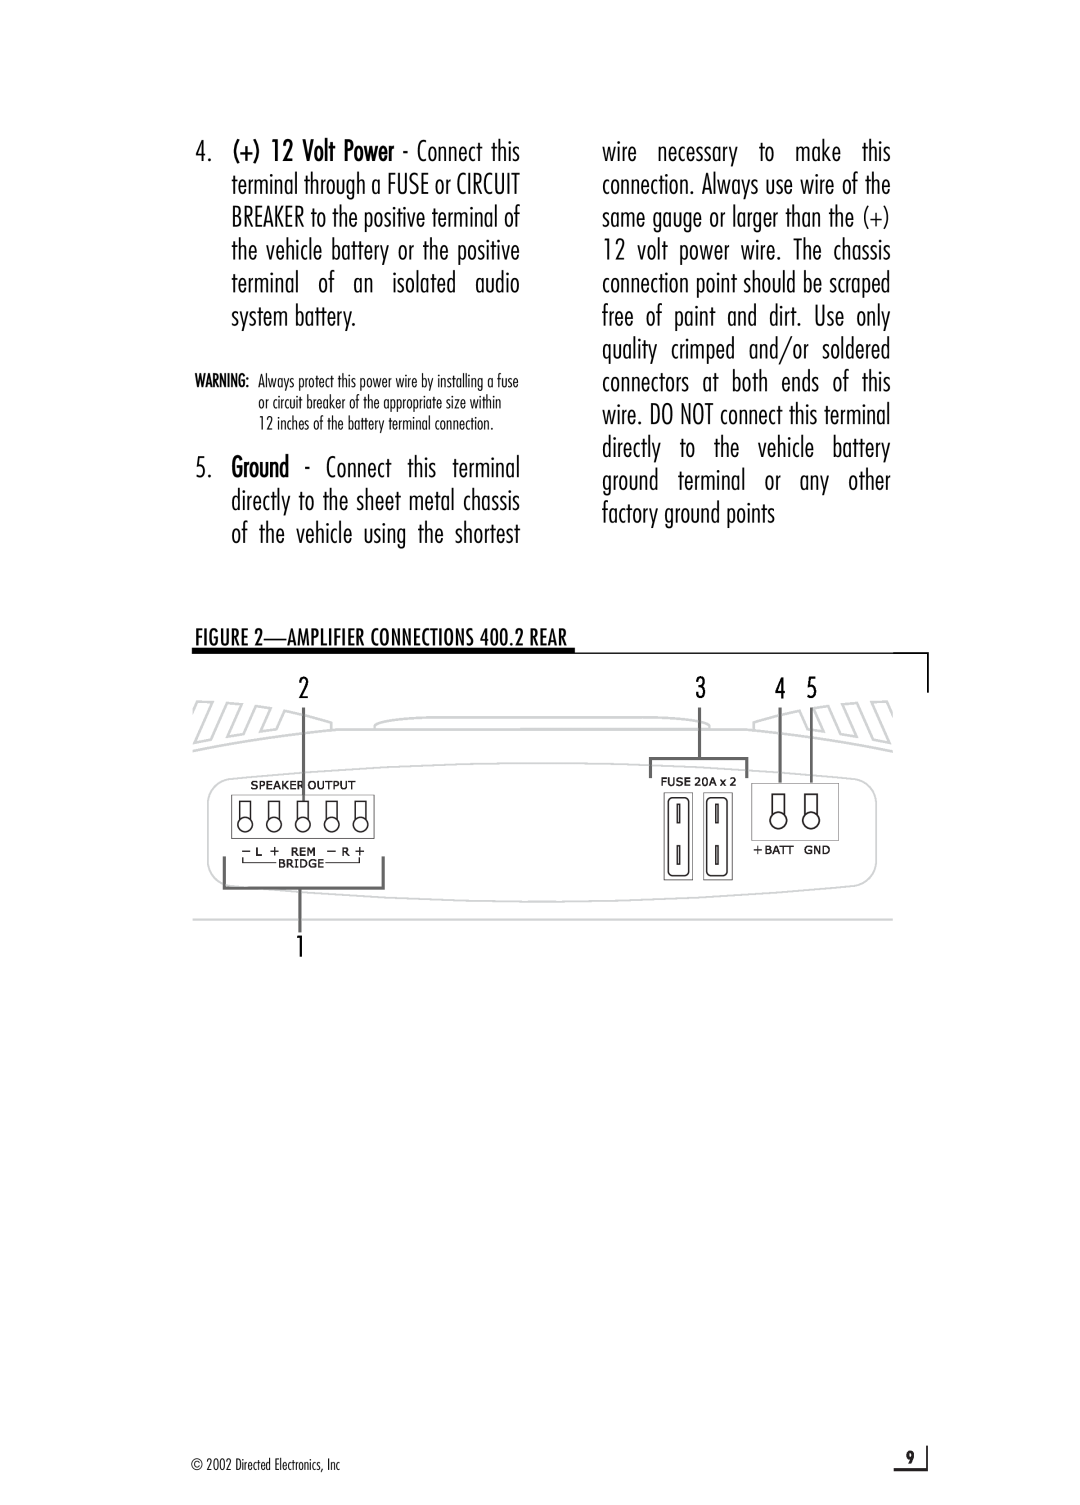 Directed Electronics manual AMPLIFIER CONNECTIONS 400.2 REAR 